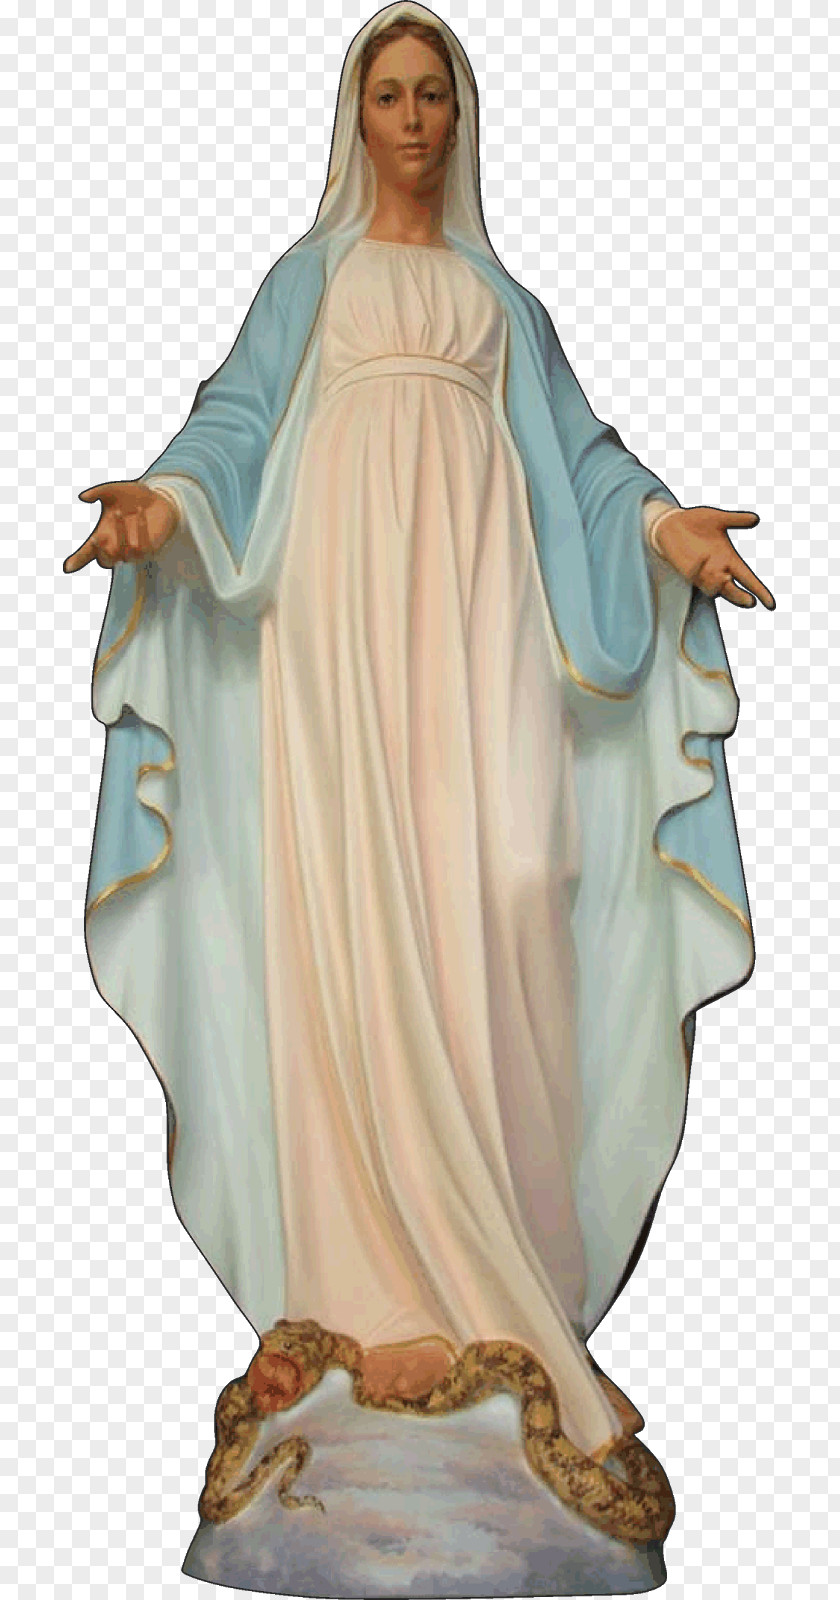 Mary Our Lady Of Guadalupe Immaculate Conception Marian Apparition Statue PNG